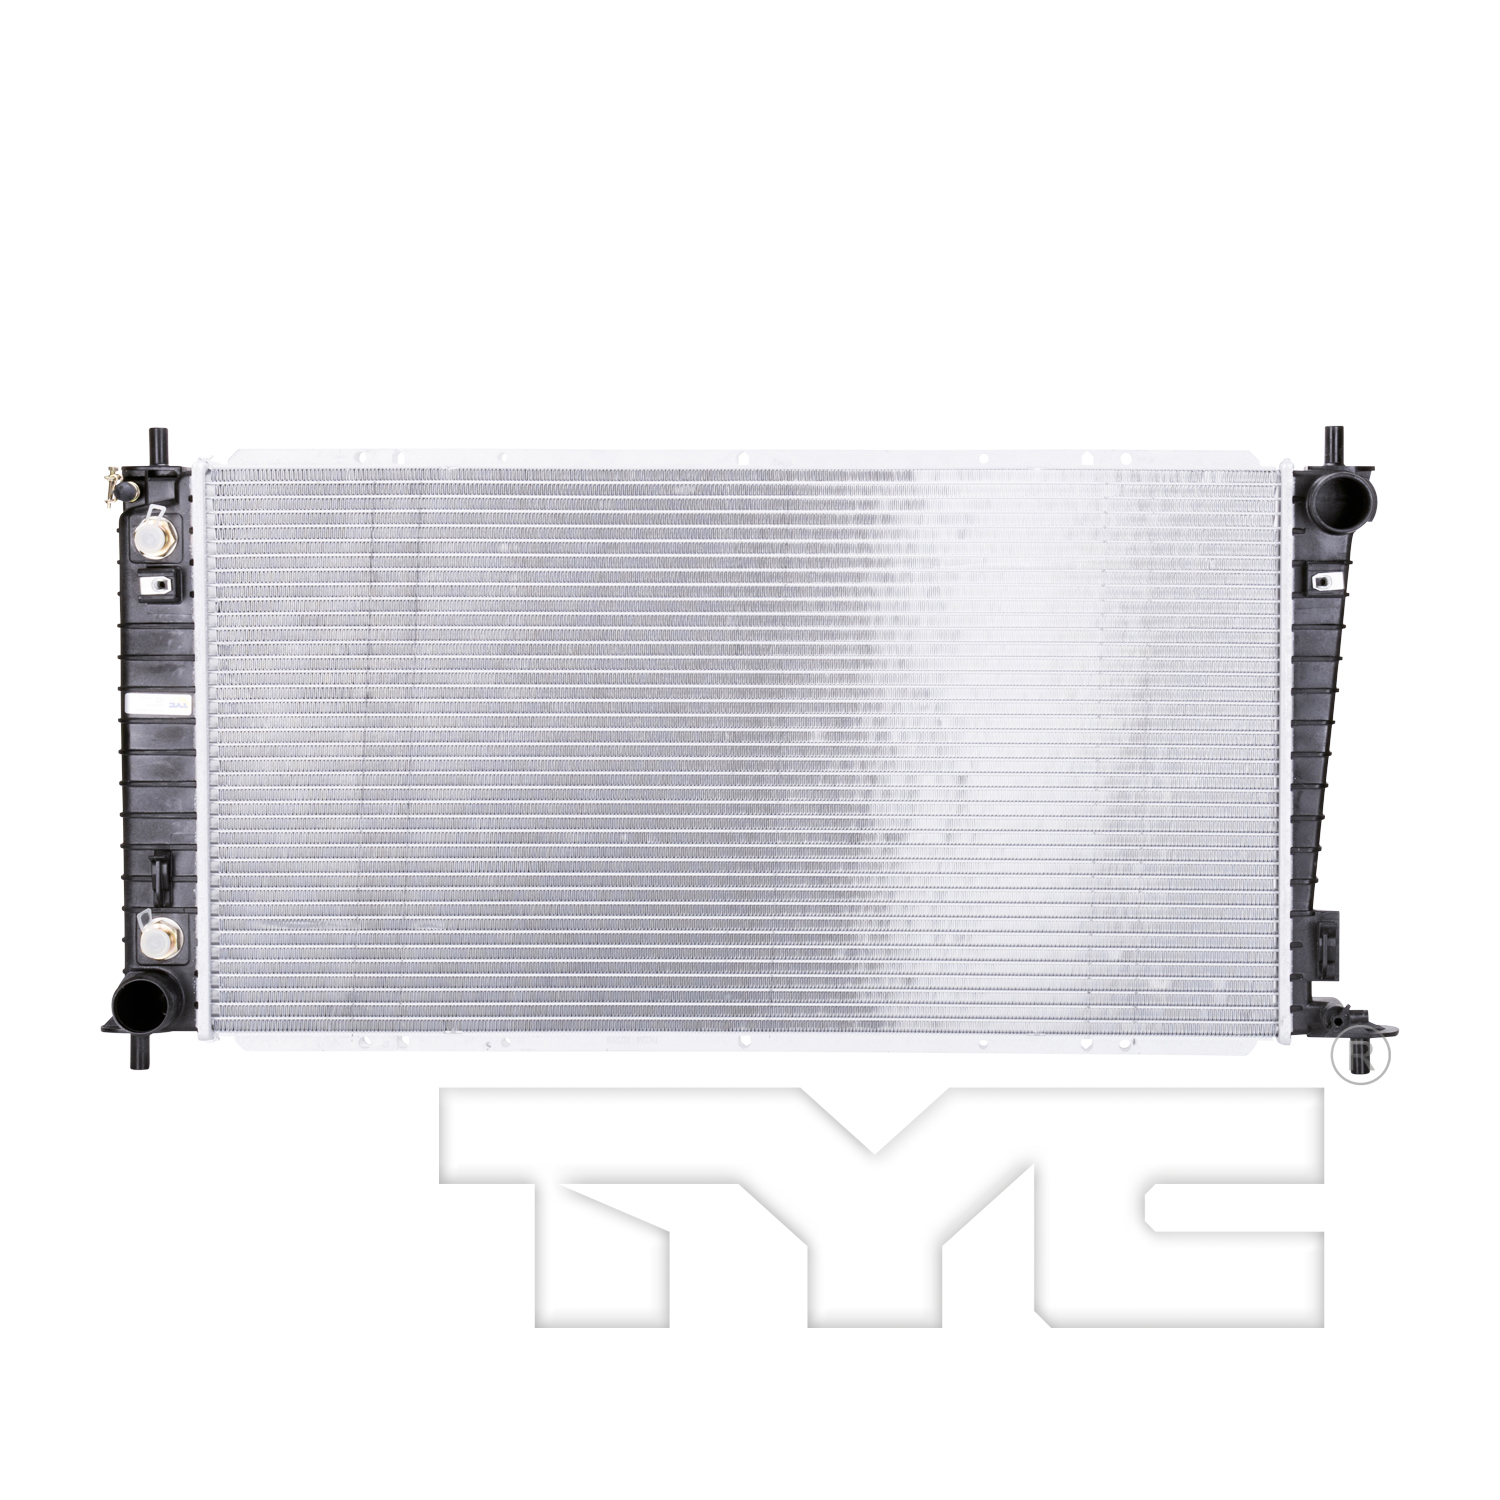 Aftermarket RADIATORS for FORD - F-150, F-150,97-99,Radiator assembly